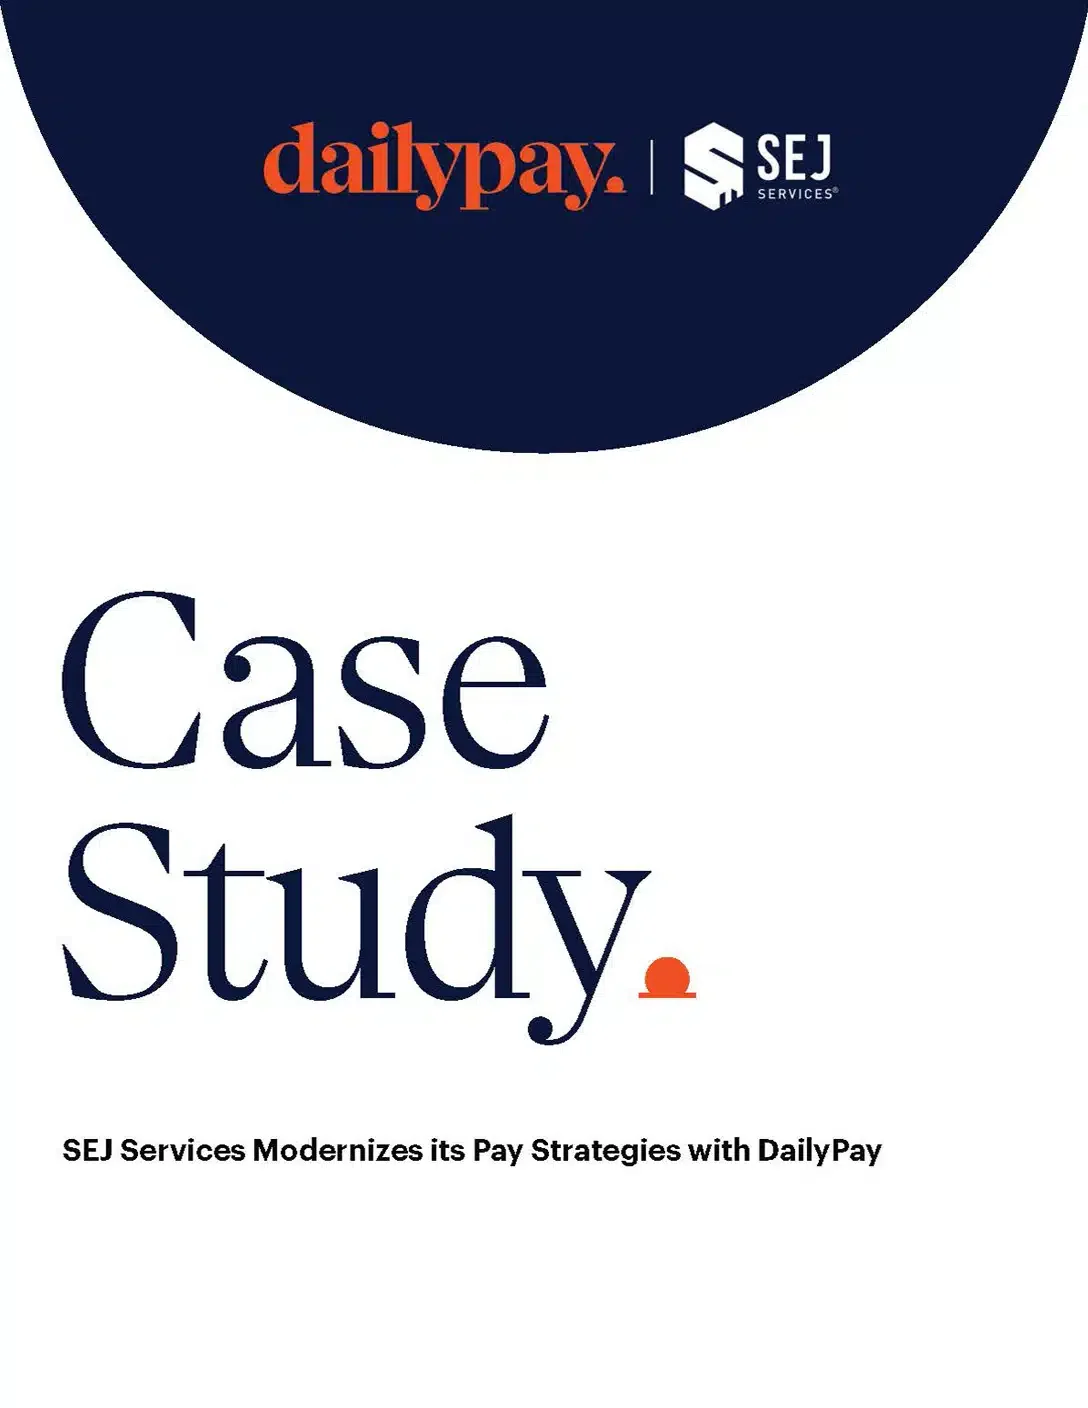 SEJ Services Modernizes its Pay Strategies with DailyPay